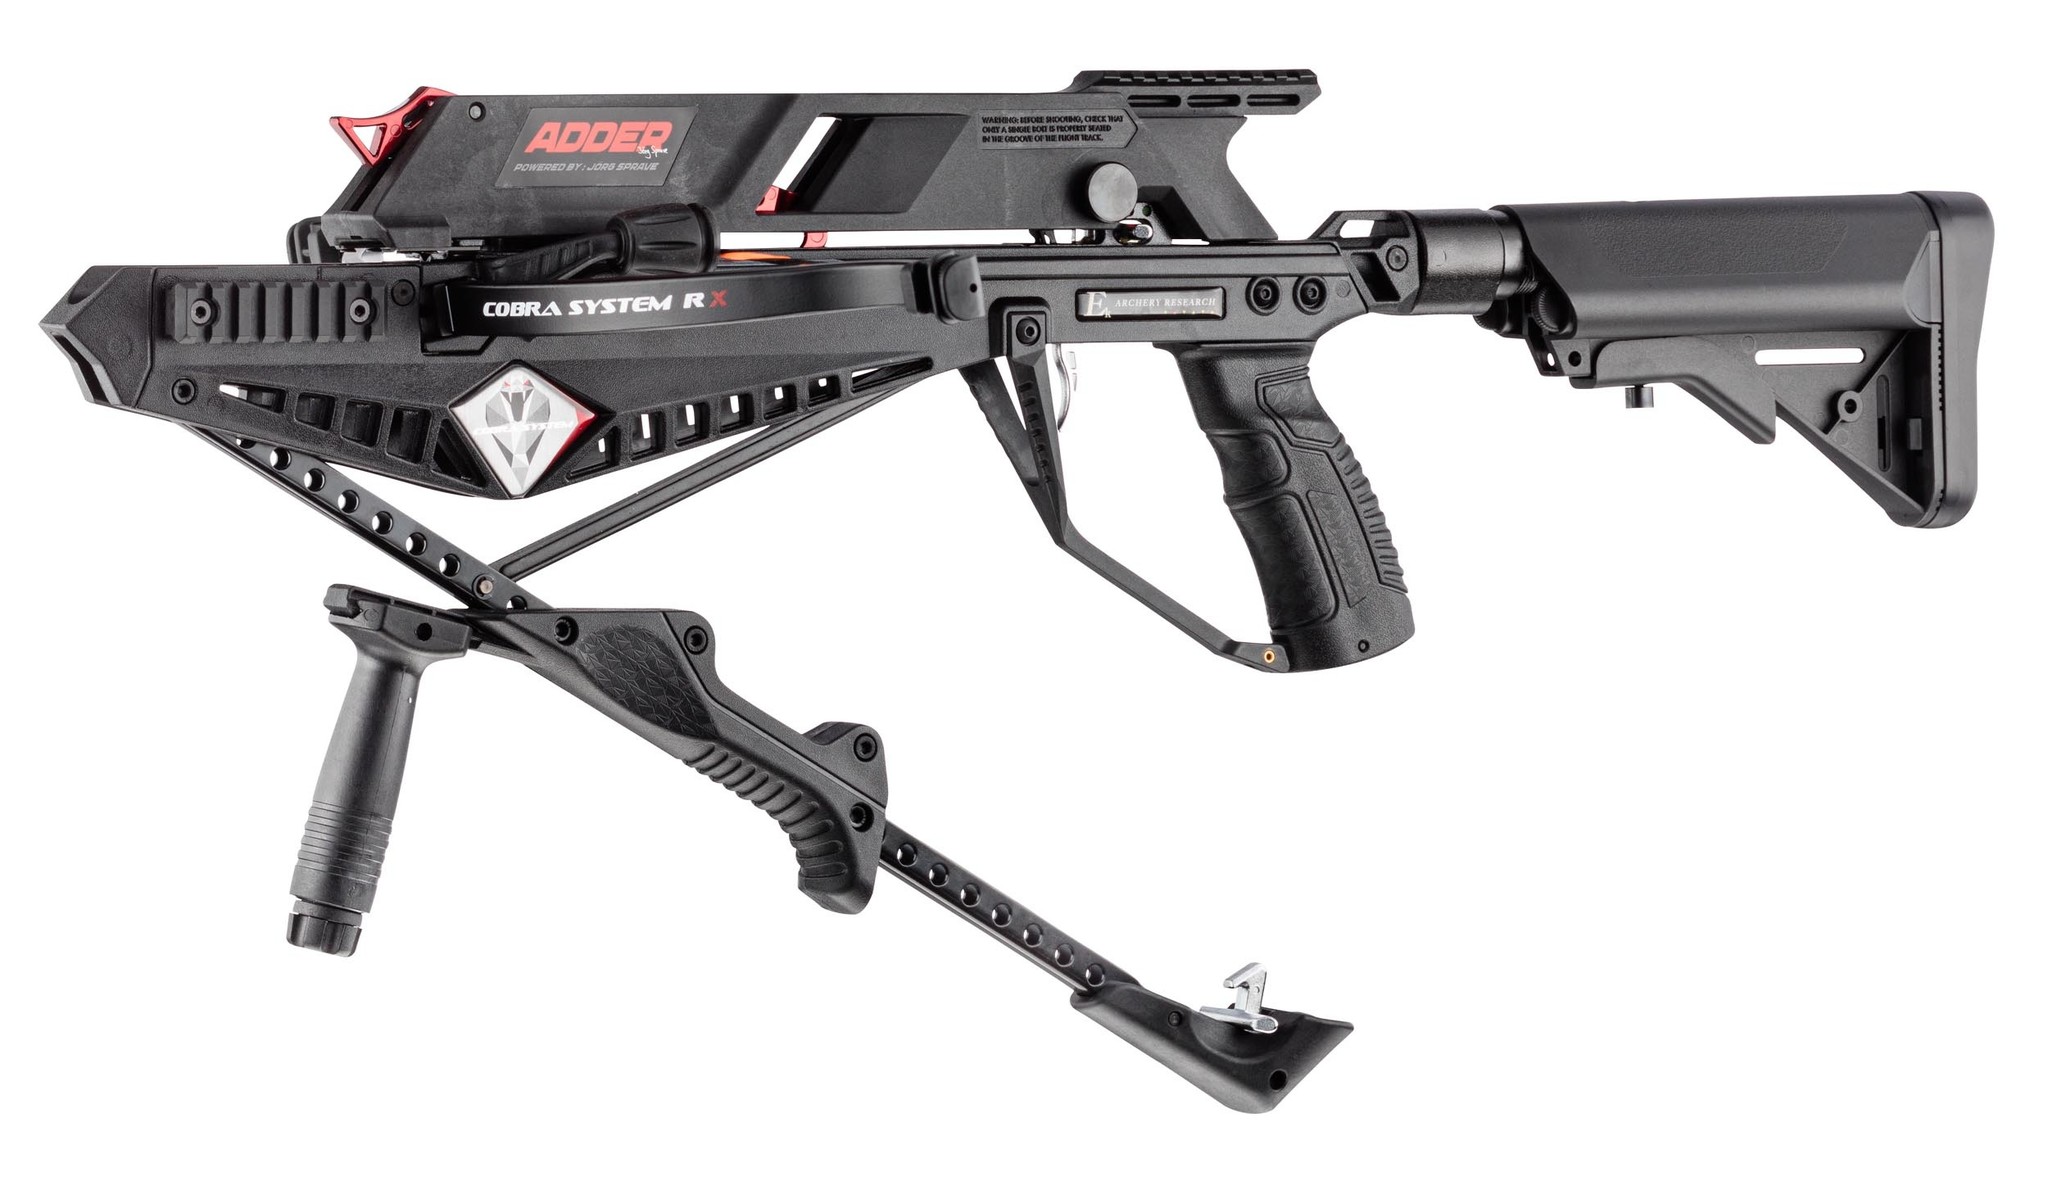 steambow ar 6 tactical repeating crossbow